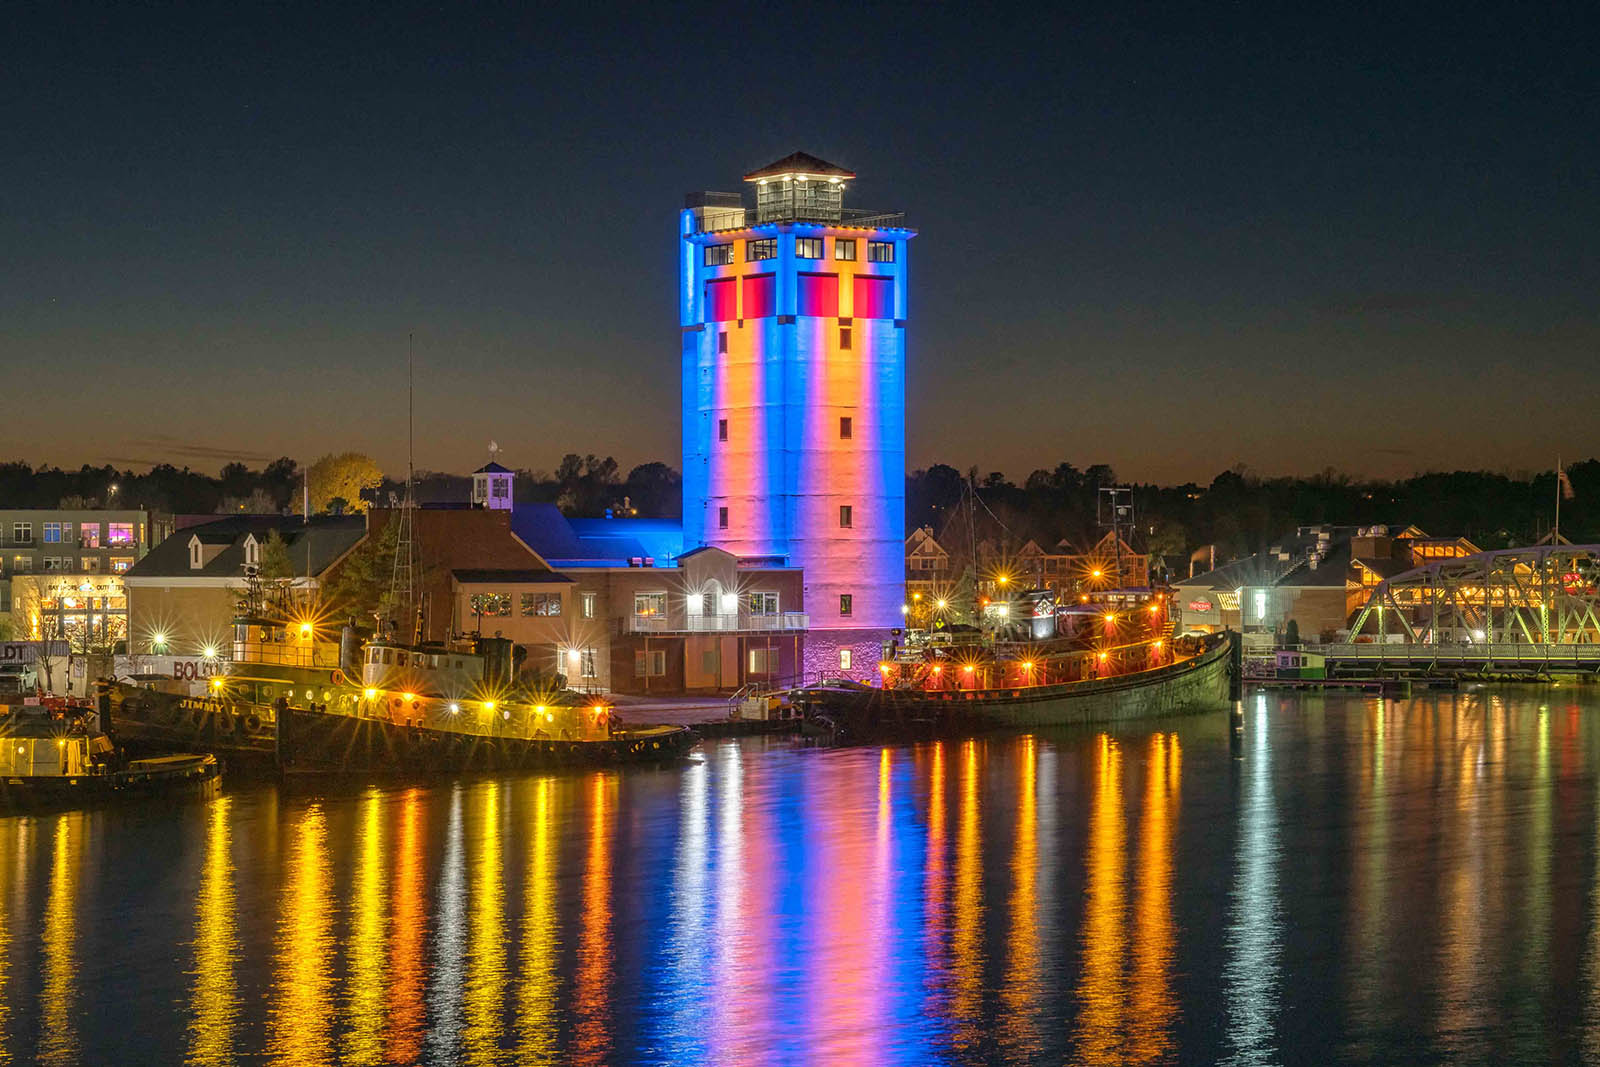 The 11 story tower with Blue and Orange color-changing LED lights at the Door County Maritime Museum in Sturgeon Bay, WI